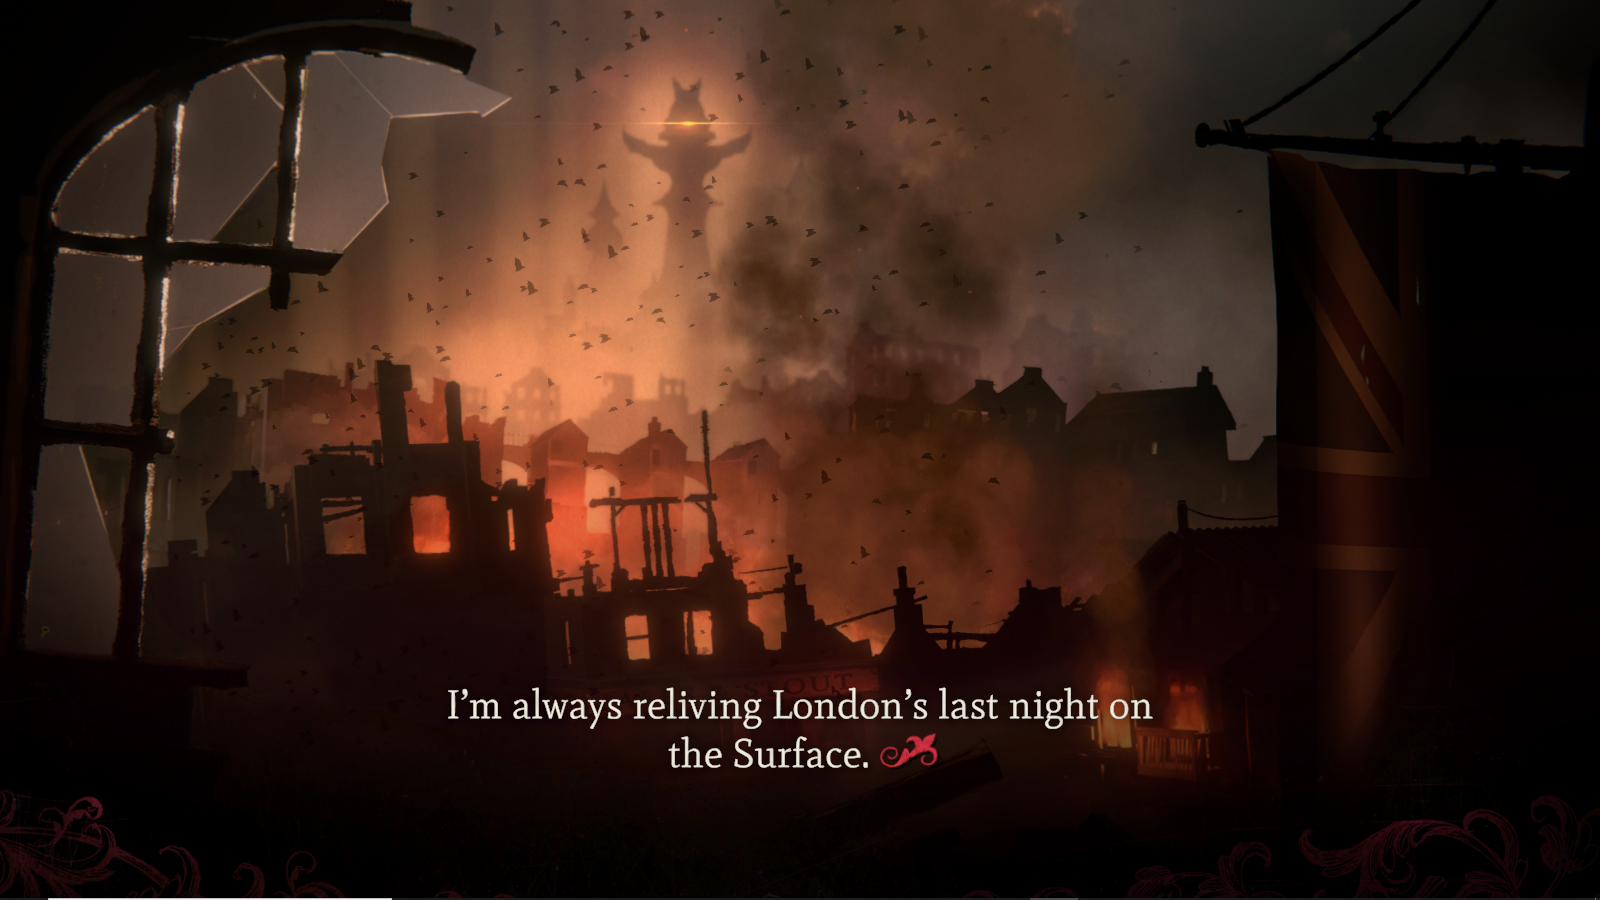 London on fire and surrounded by bats